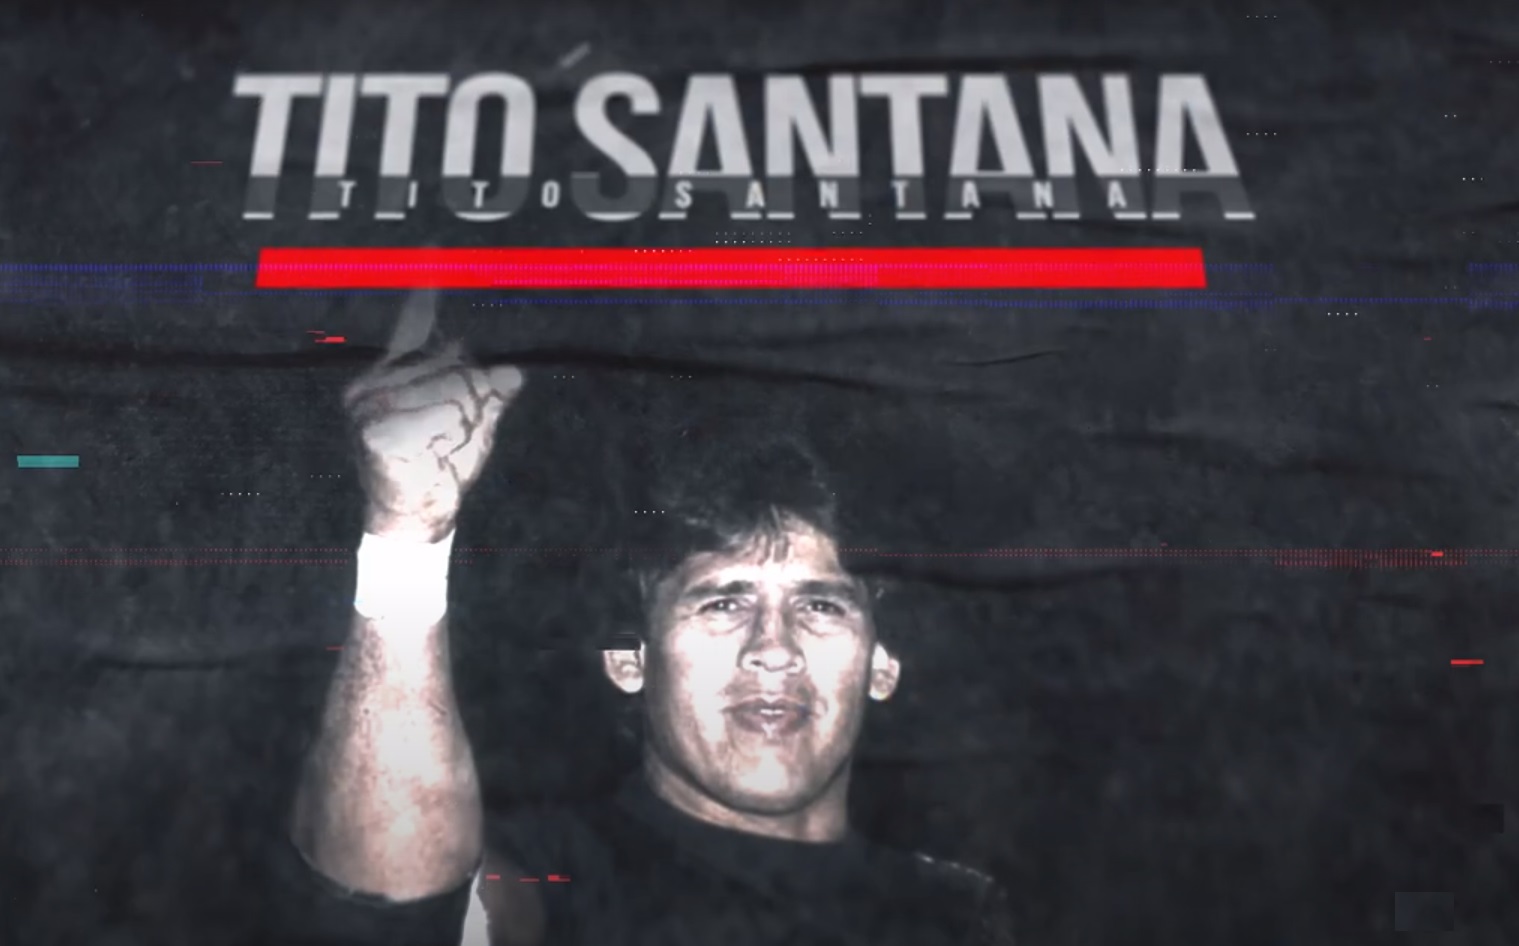 Announcement Tito Santana Remco Wrestling Action Figure by Powertown 